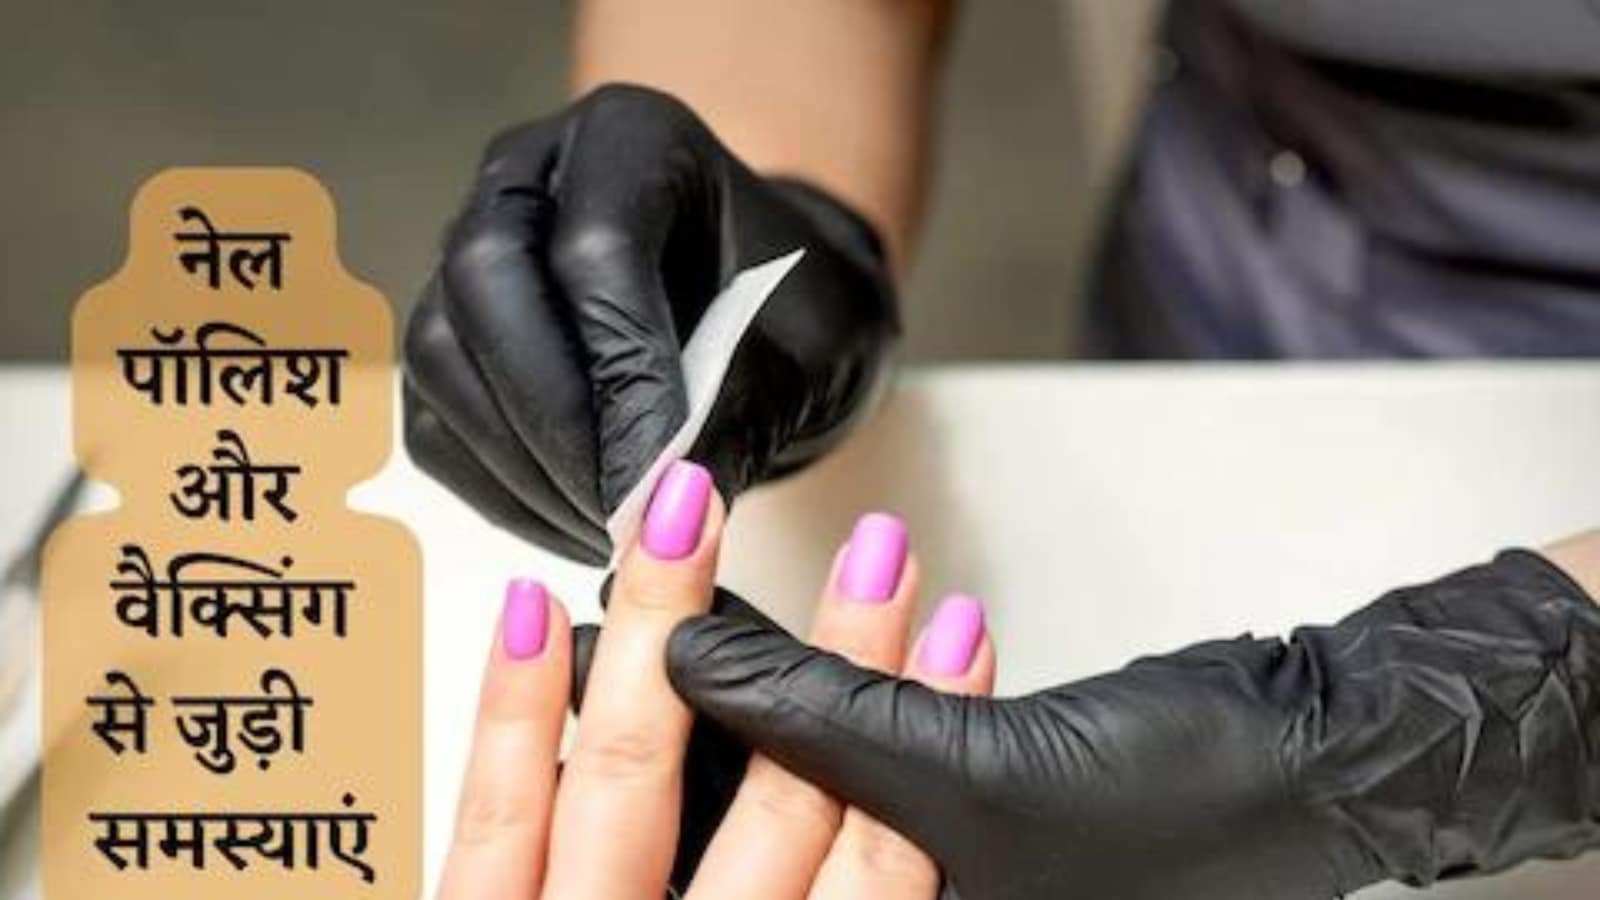 Try These Hacks For A Better Manicure And Pedicure Routine